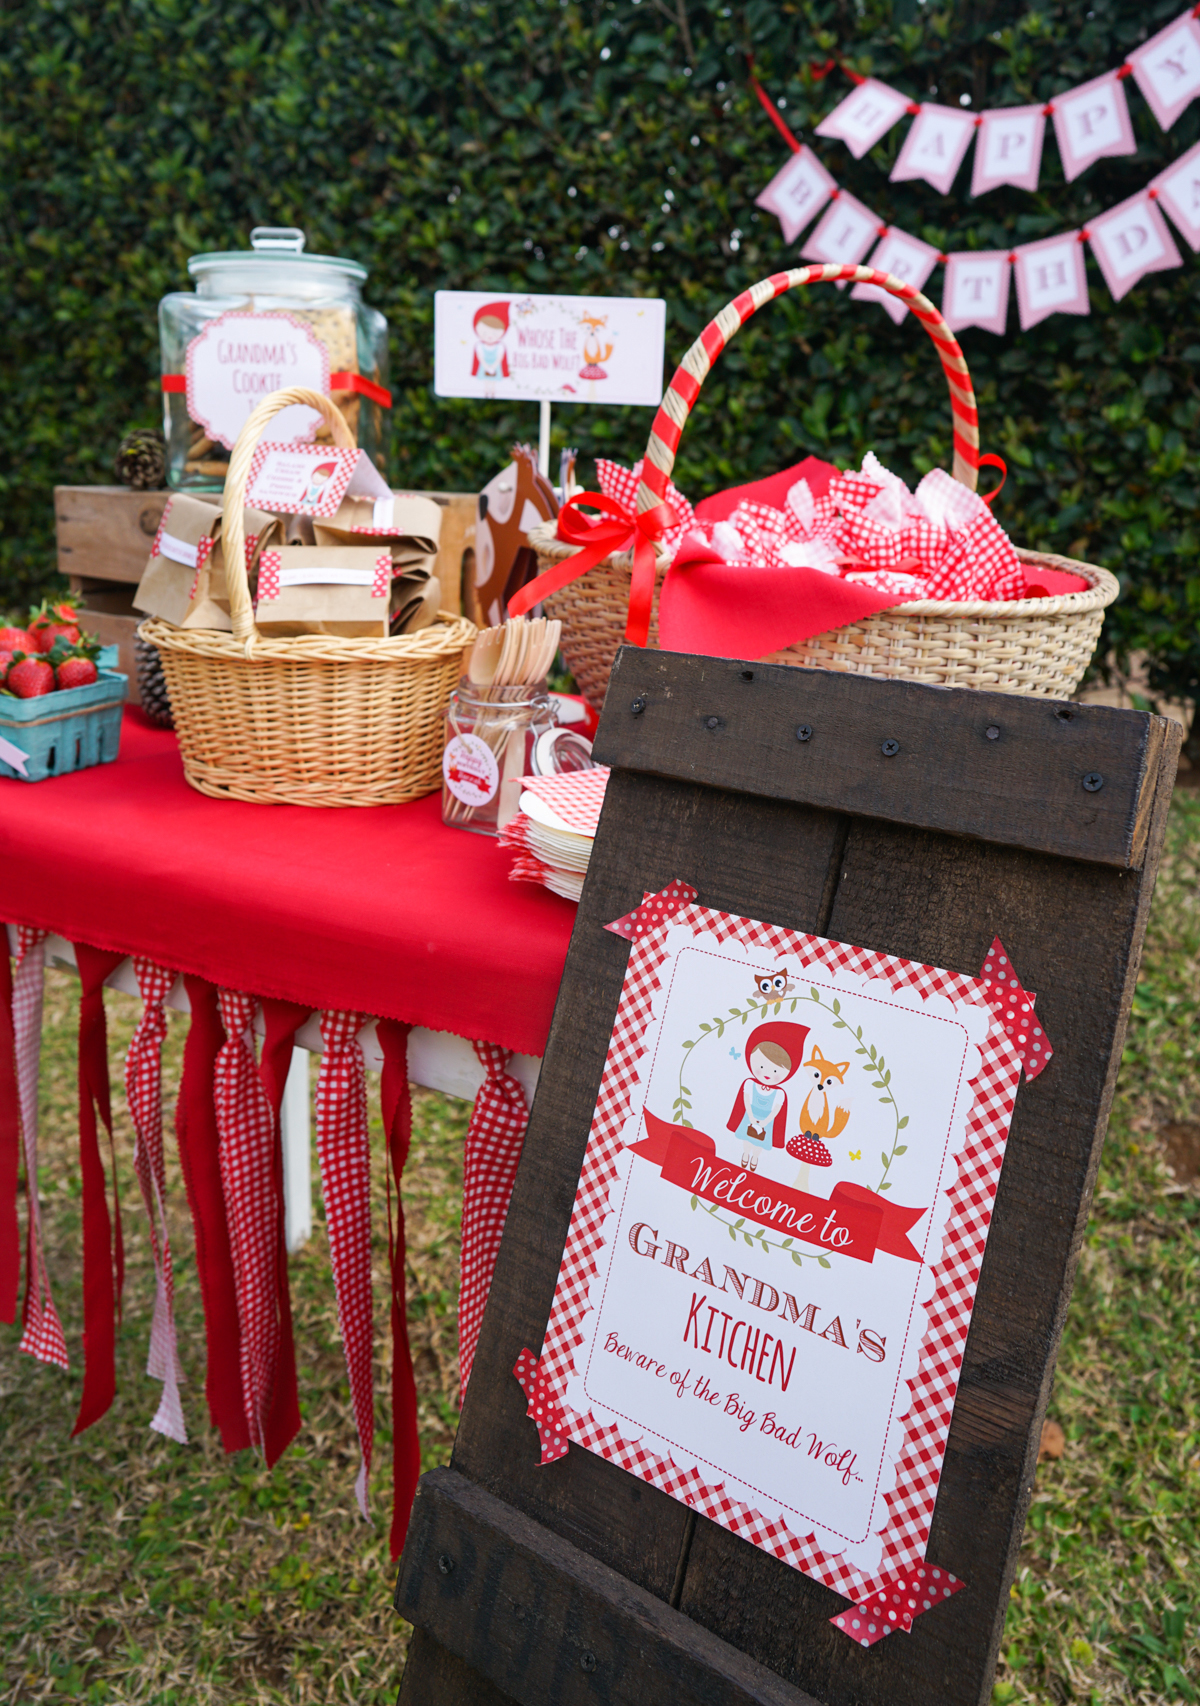 Little Red Riding Hood Party Table with a red table cloth and red gingham bunting adorned with sweet and party treats